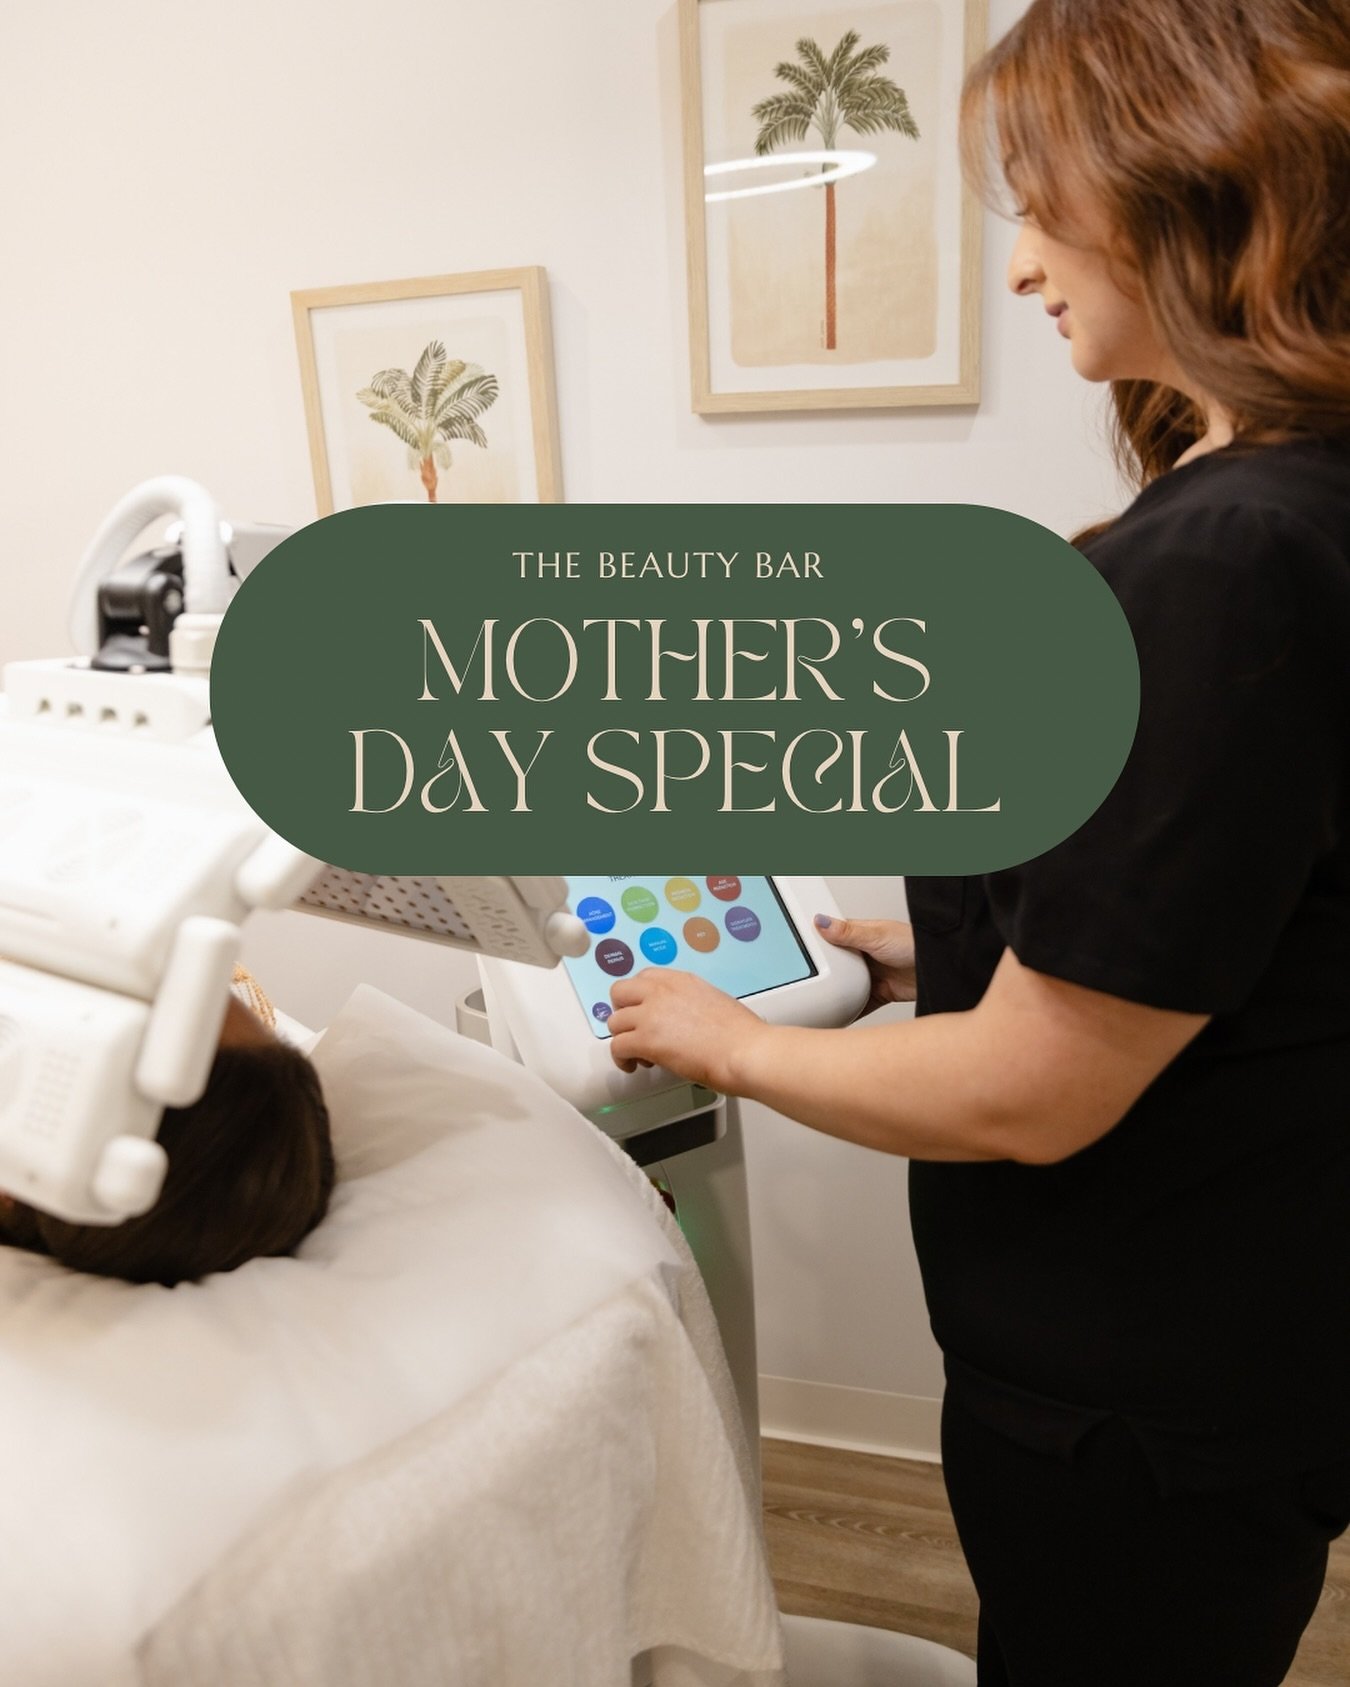 Don&rsquo;t miss out on our exclusive Mother&rsquo;s Day offer!

Spoil mum with a gift card from The Beauty Bar, and we&rsquo;ll make it even better with a complimentary gift!

🎁 Purchase a $150 gift card and receive one free gift.
🎁🎁 Spend $200 o